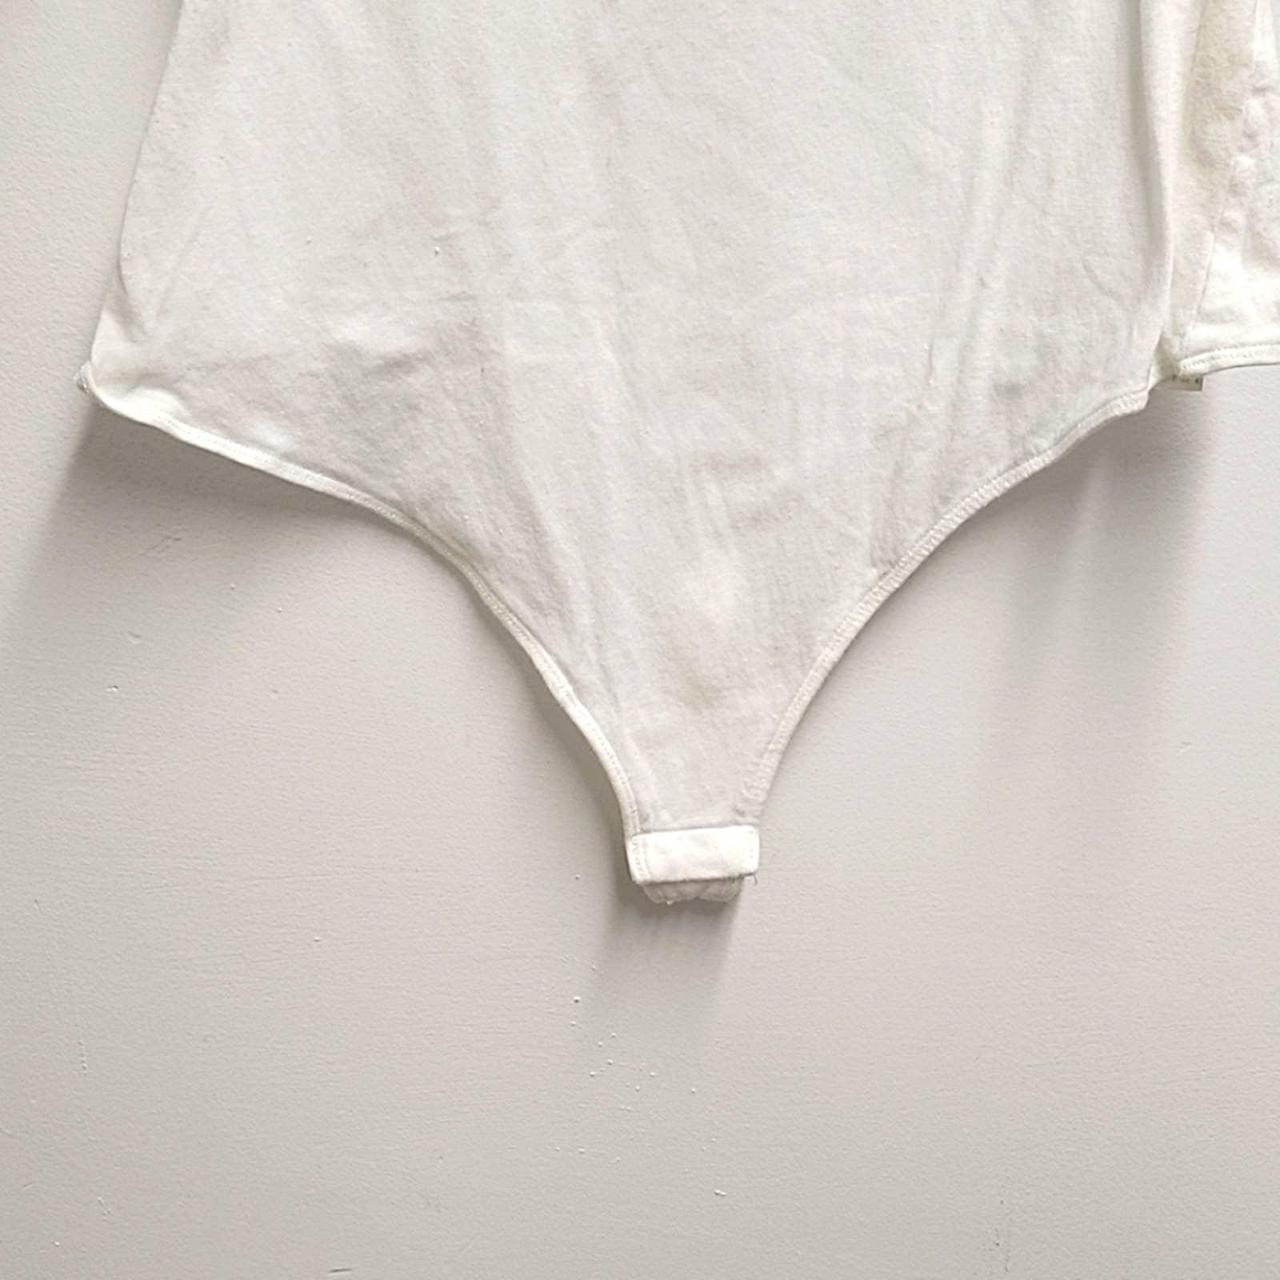 Intimately Free People Thong Body Suit Puffed - Depop